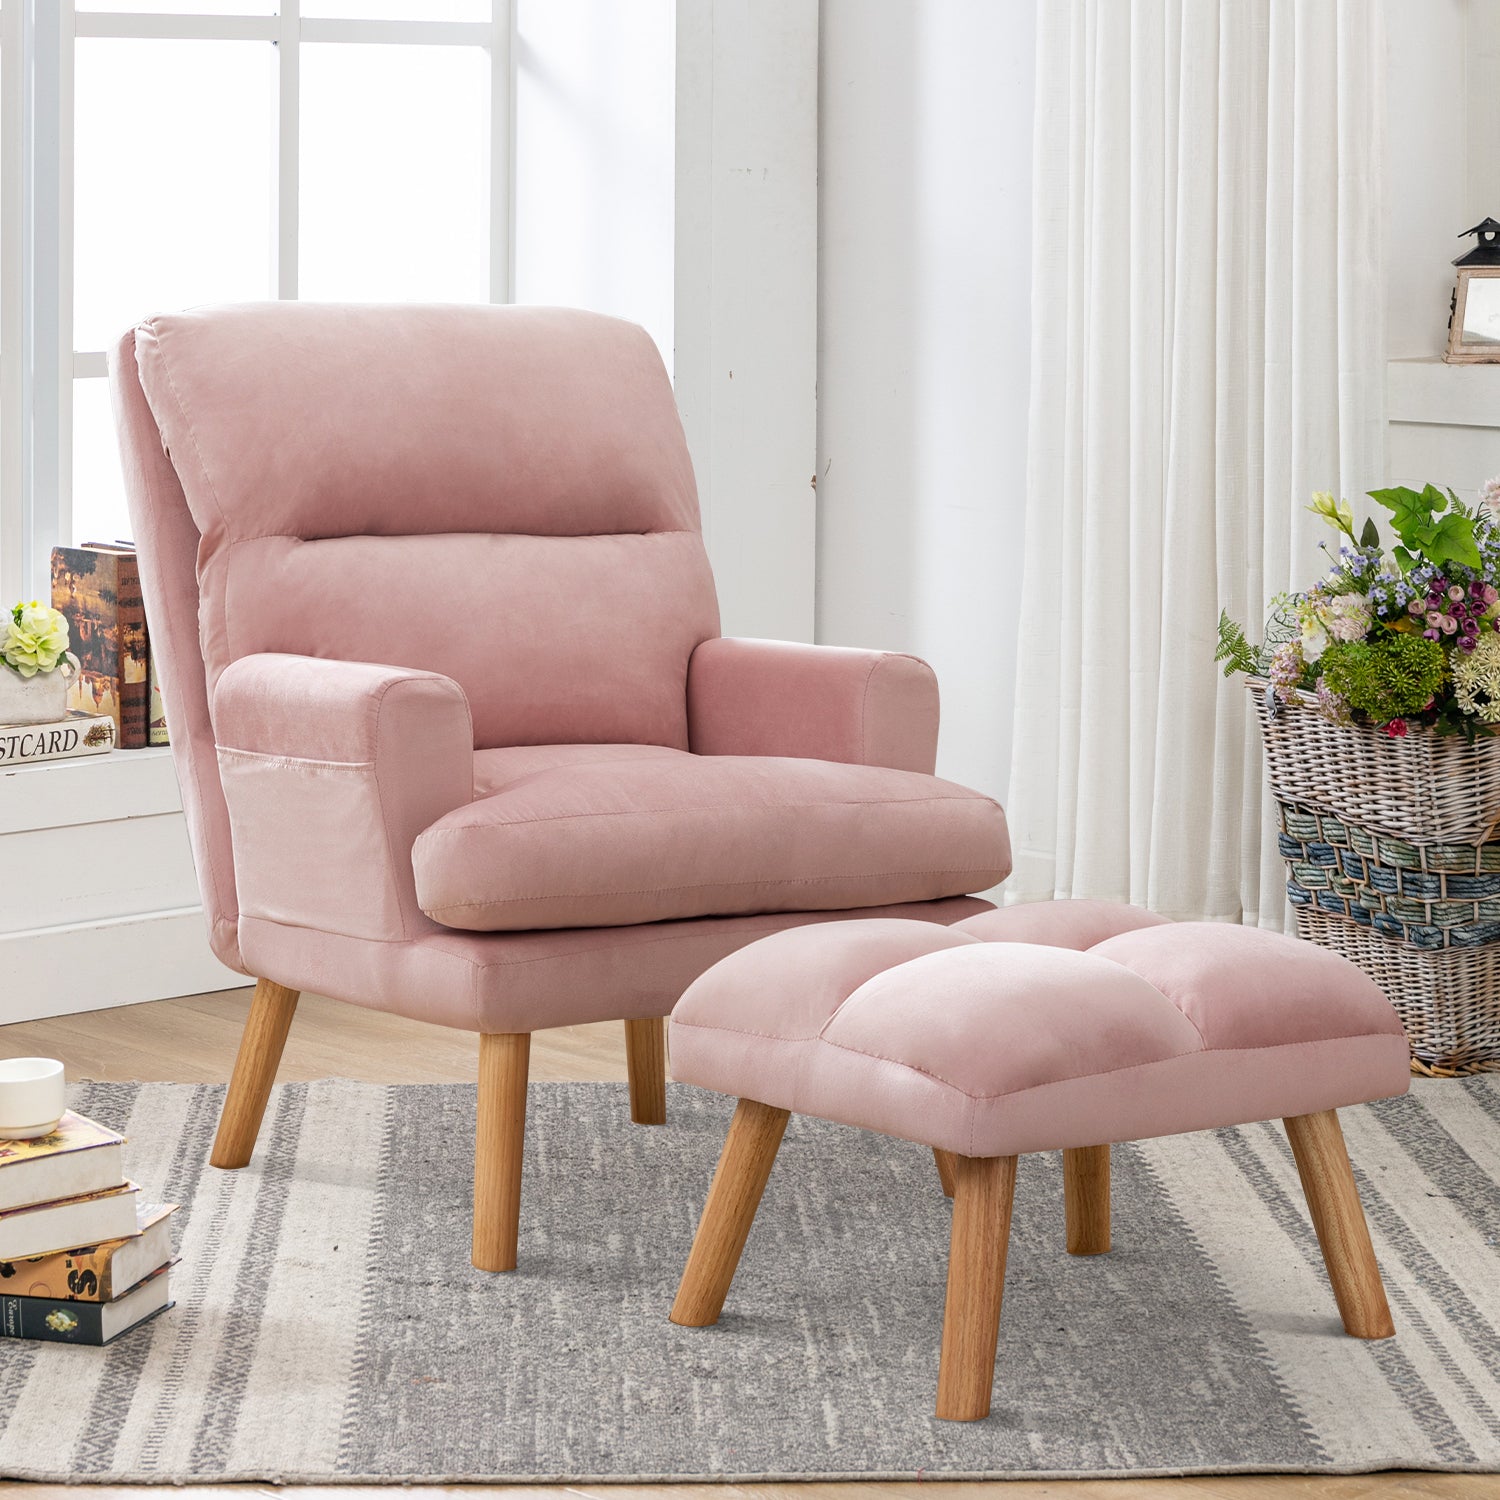 Accent-Chair-with-Footrest-Pink-Chairs-&-Seating